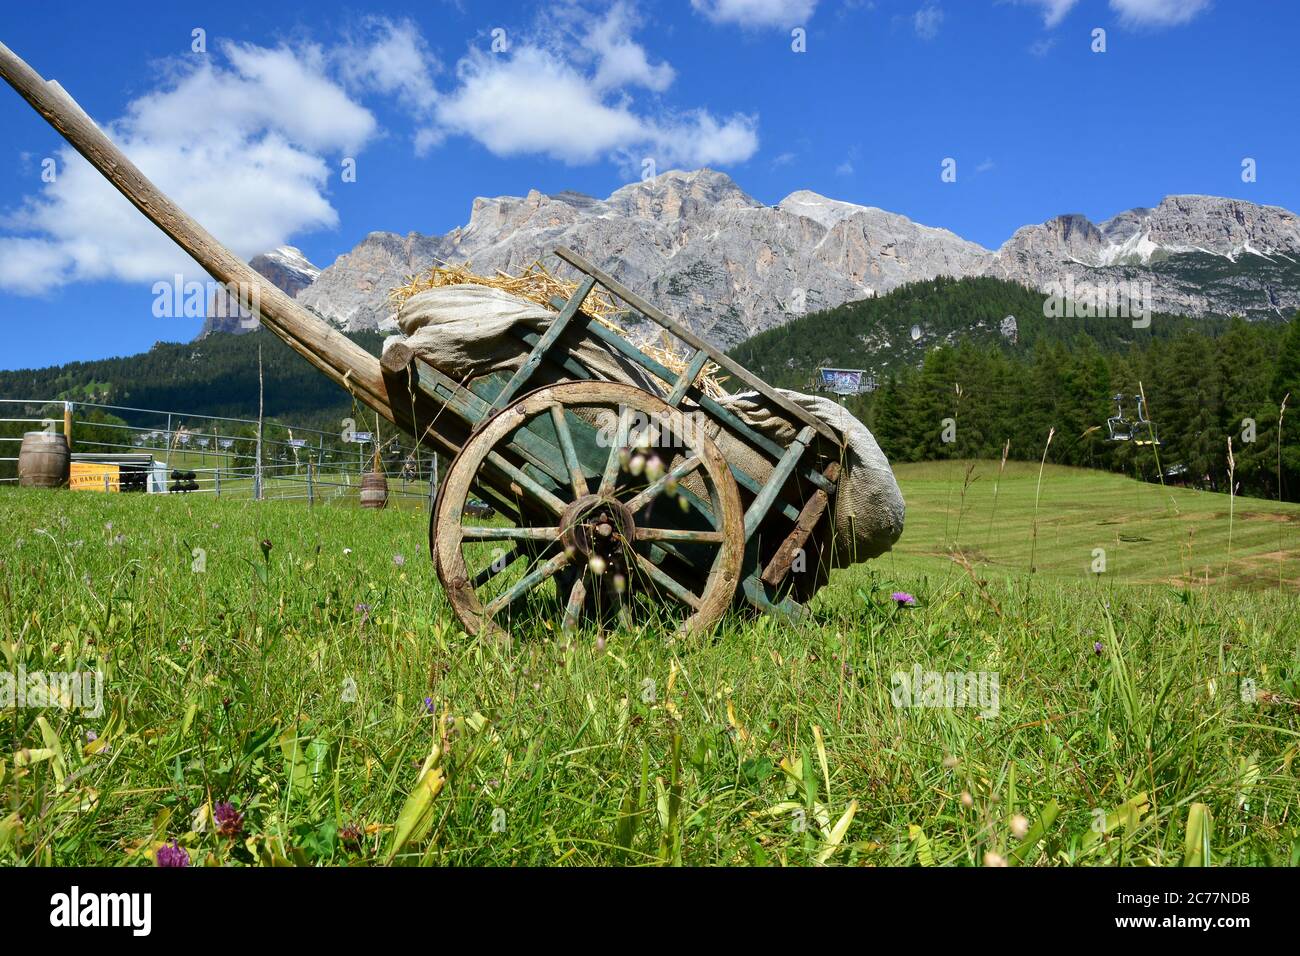 a wagon of hay and straw under Le Tofane, in Cortina d'Ampezzo, Italy Stock Photo